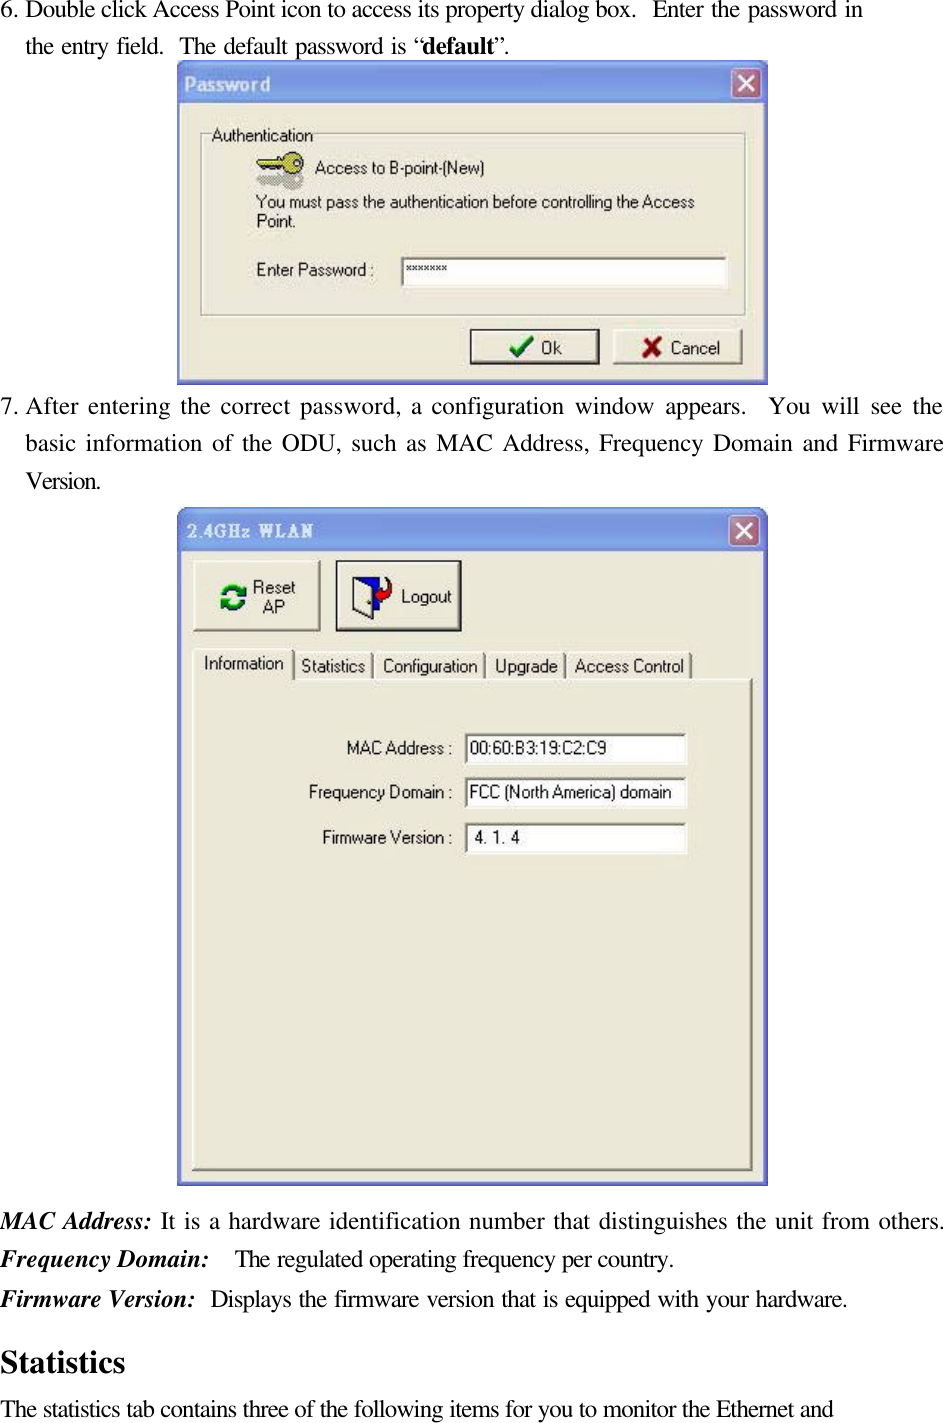 6. Double click Access Point icon to access its property dialog box.  Enter the password in the entry field.  The default password is “default”.  7. After entering the correct password, a configuration window appears.  You will see the basic information of the ODU, such as MAC Address, Frequency Domain and Firmware Version.  MAC Address: It is a hardware identification number that distinguishes the unit from others. Frequency Domain:  The regulated operating frequency per country.   Firmware Version:  Displays the firmware version that is equipped with your hardware.  Statistics The statistics tab contains three of the following items for you to monitor the Ethernet and 